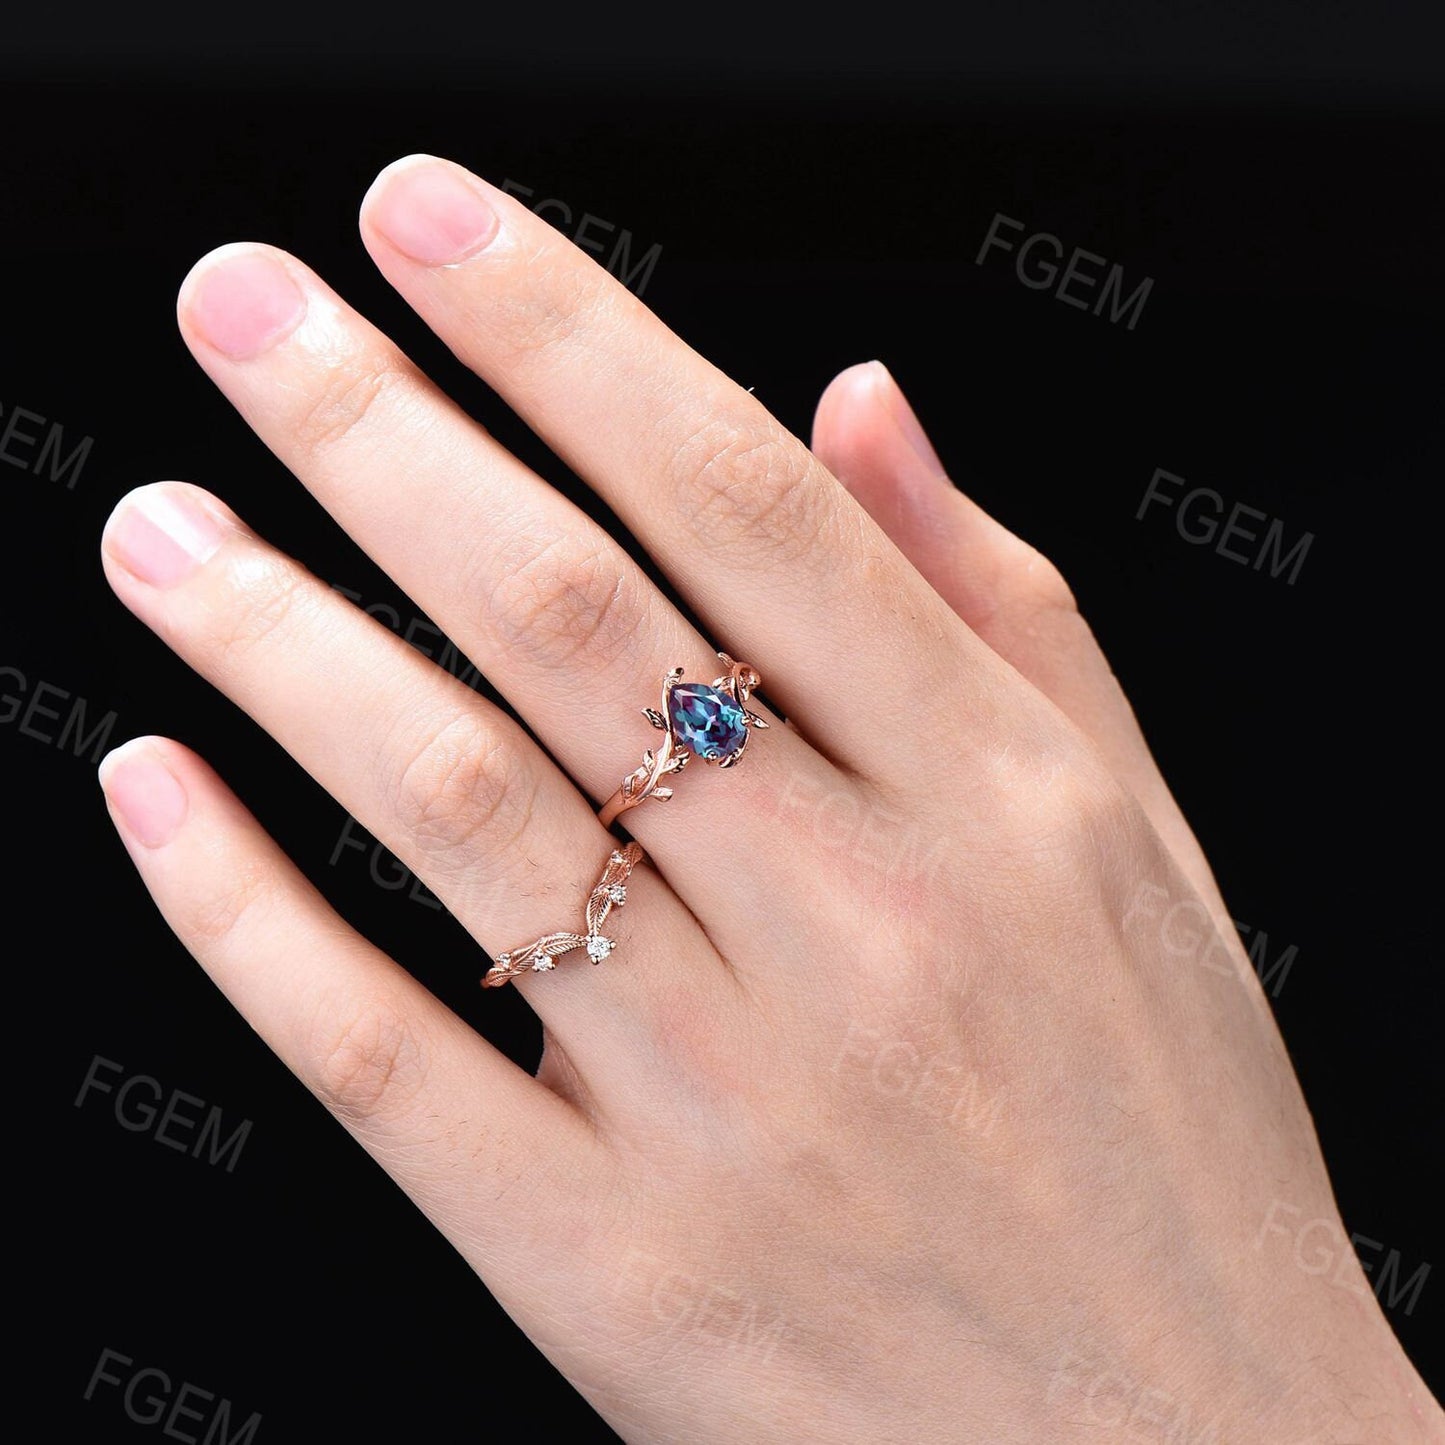 Nature Engagement Ring Set 1.25ct Pear Shaped Solitaire Alexandrite Ring Set Leaf Wedding Ring Unique June Birthstone Jewelry Gift for Women